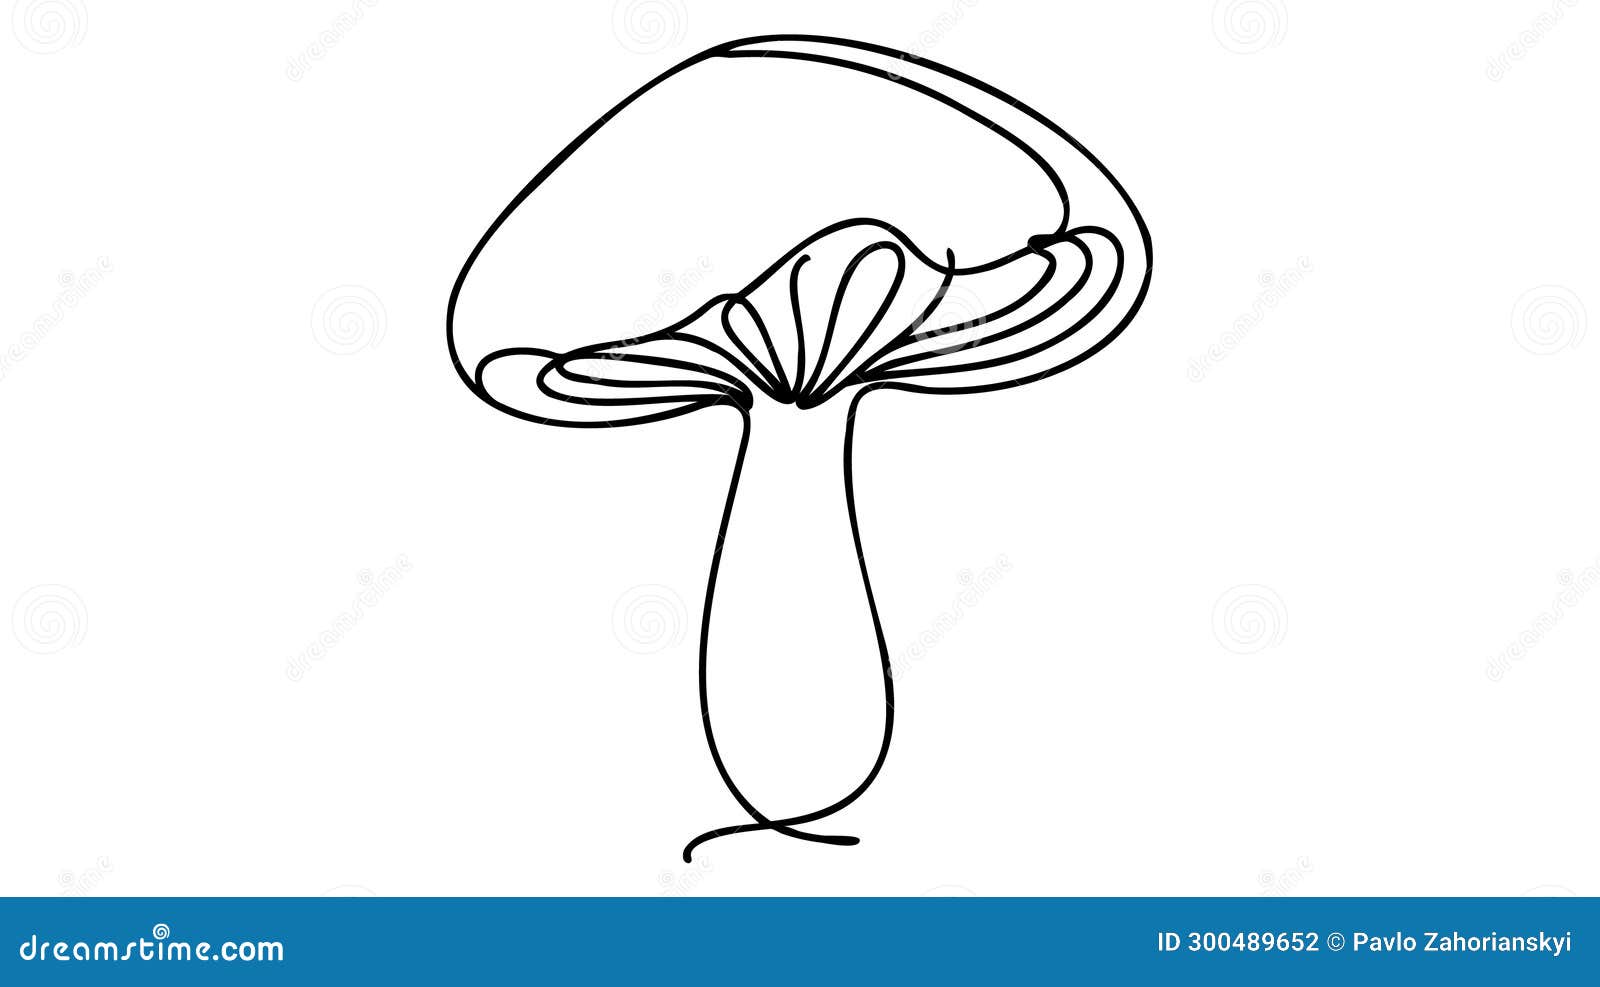 Continuous One Line Drawing of Mushroom. Vector Illustration Stock ...